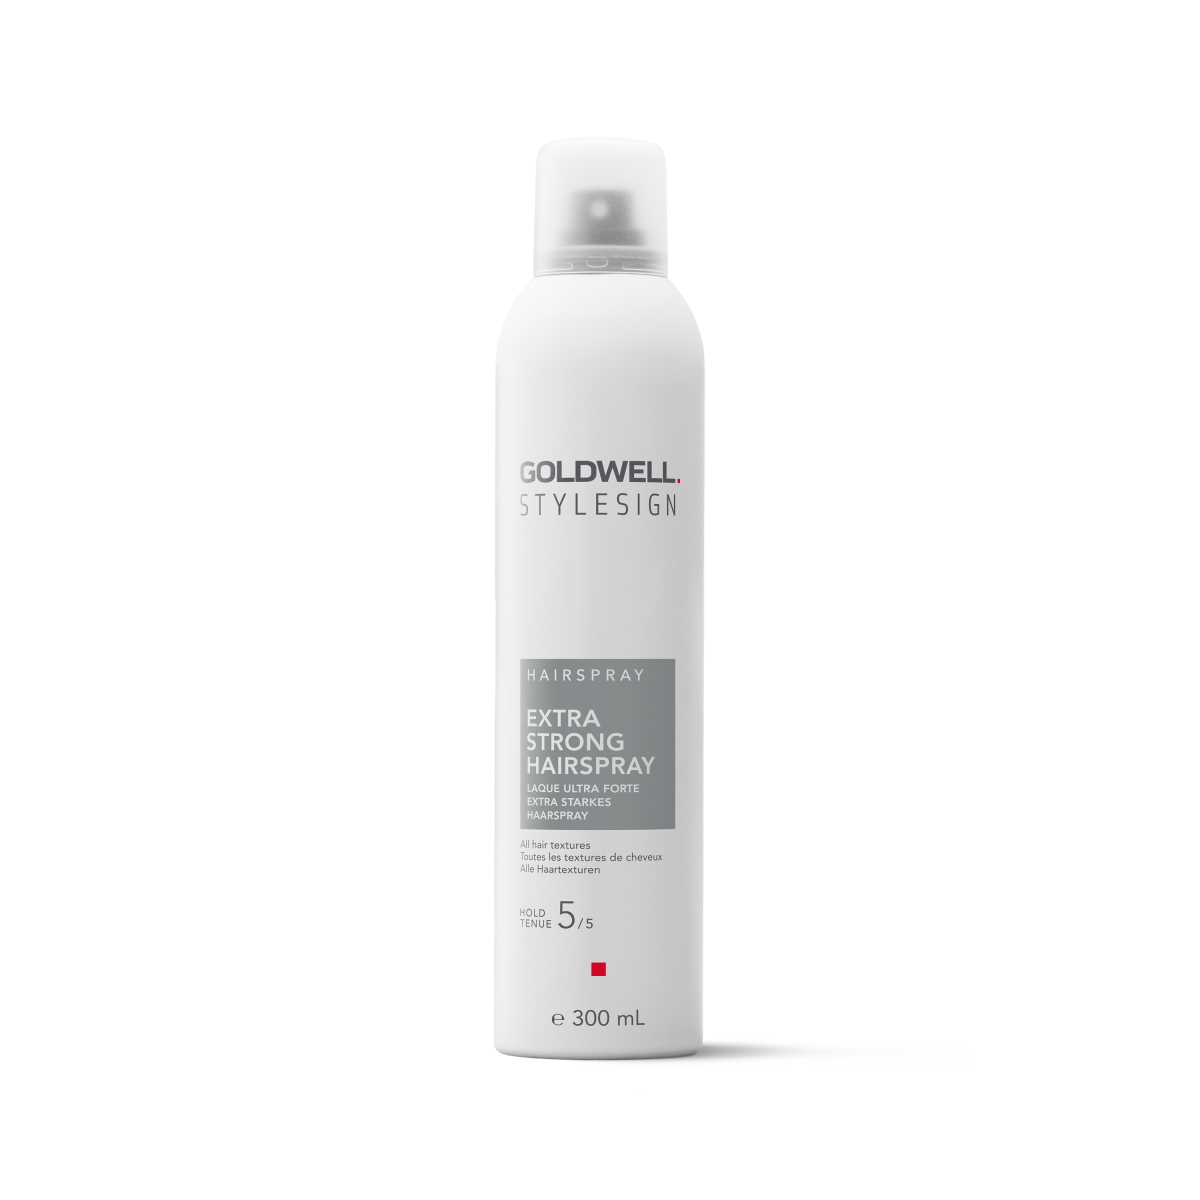 Goldwell Style Sign Hairspray Extra Strong Hairspray 500ml